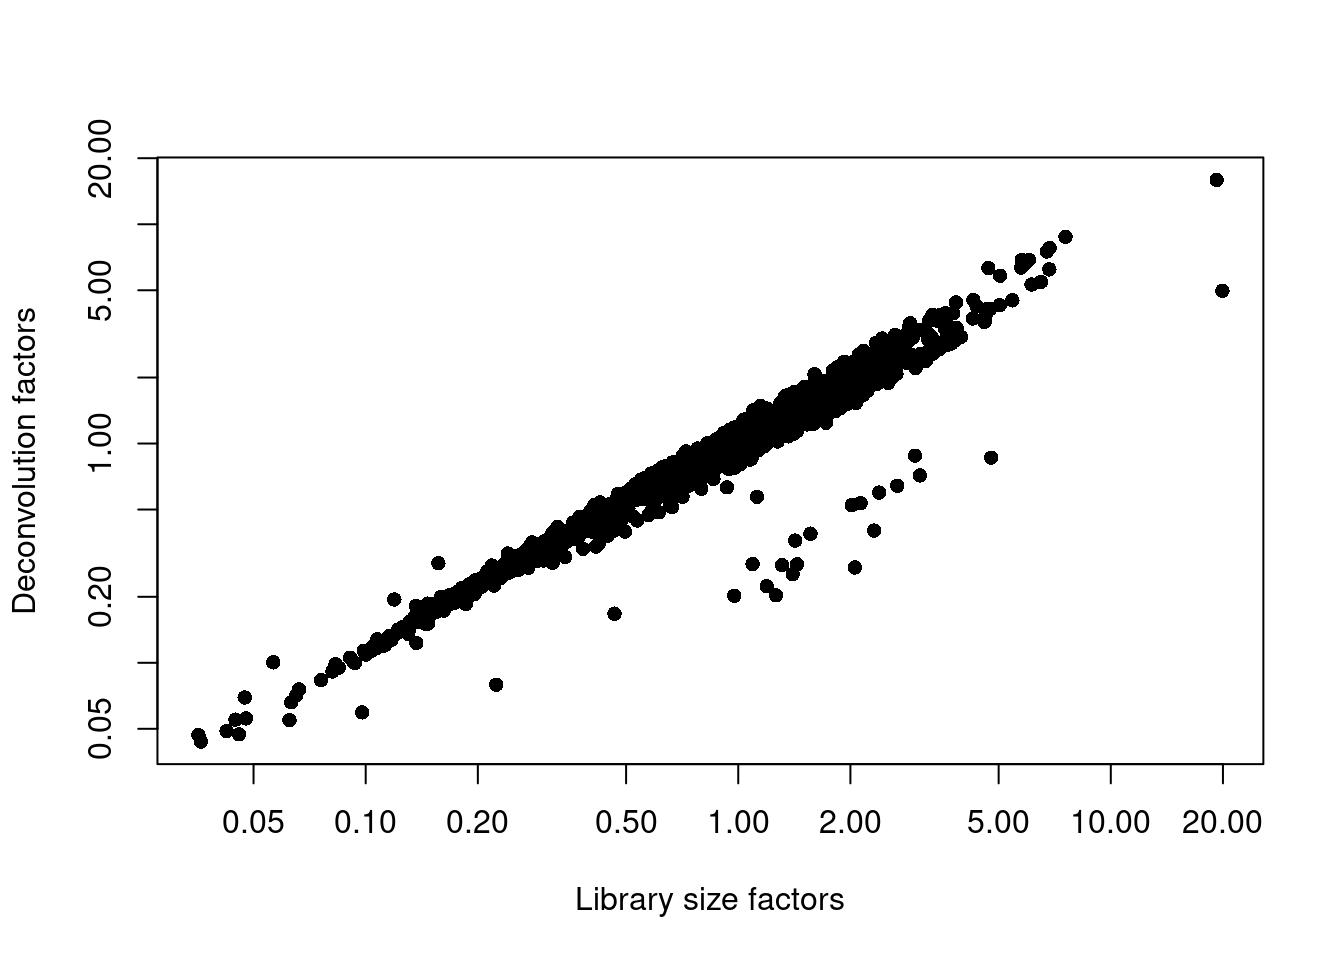 Relationship between the library size factors and the deconvolution size factors in the Nestorowa HSC dataset.